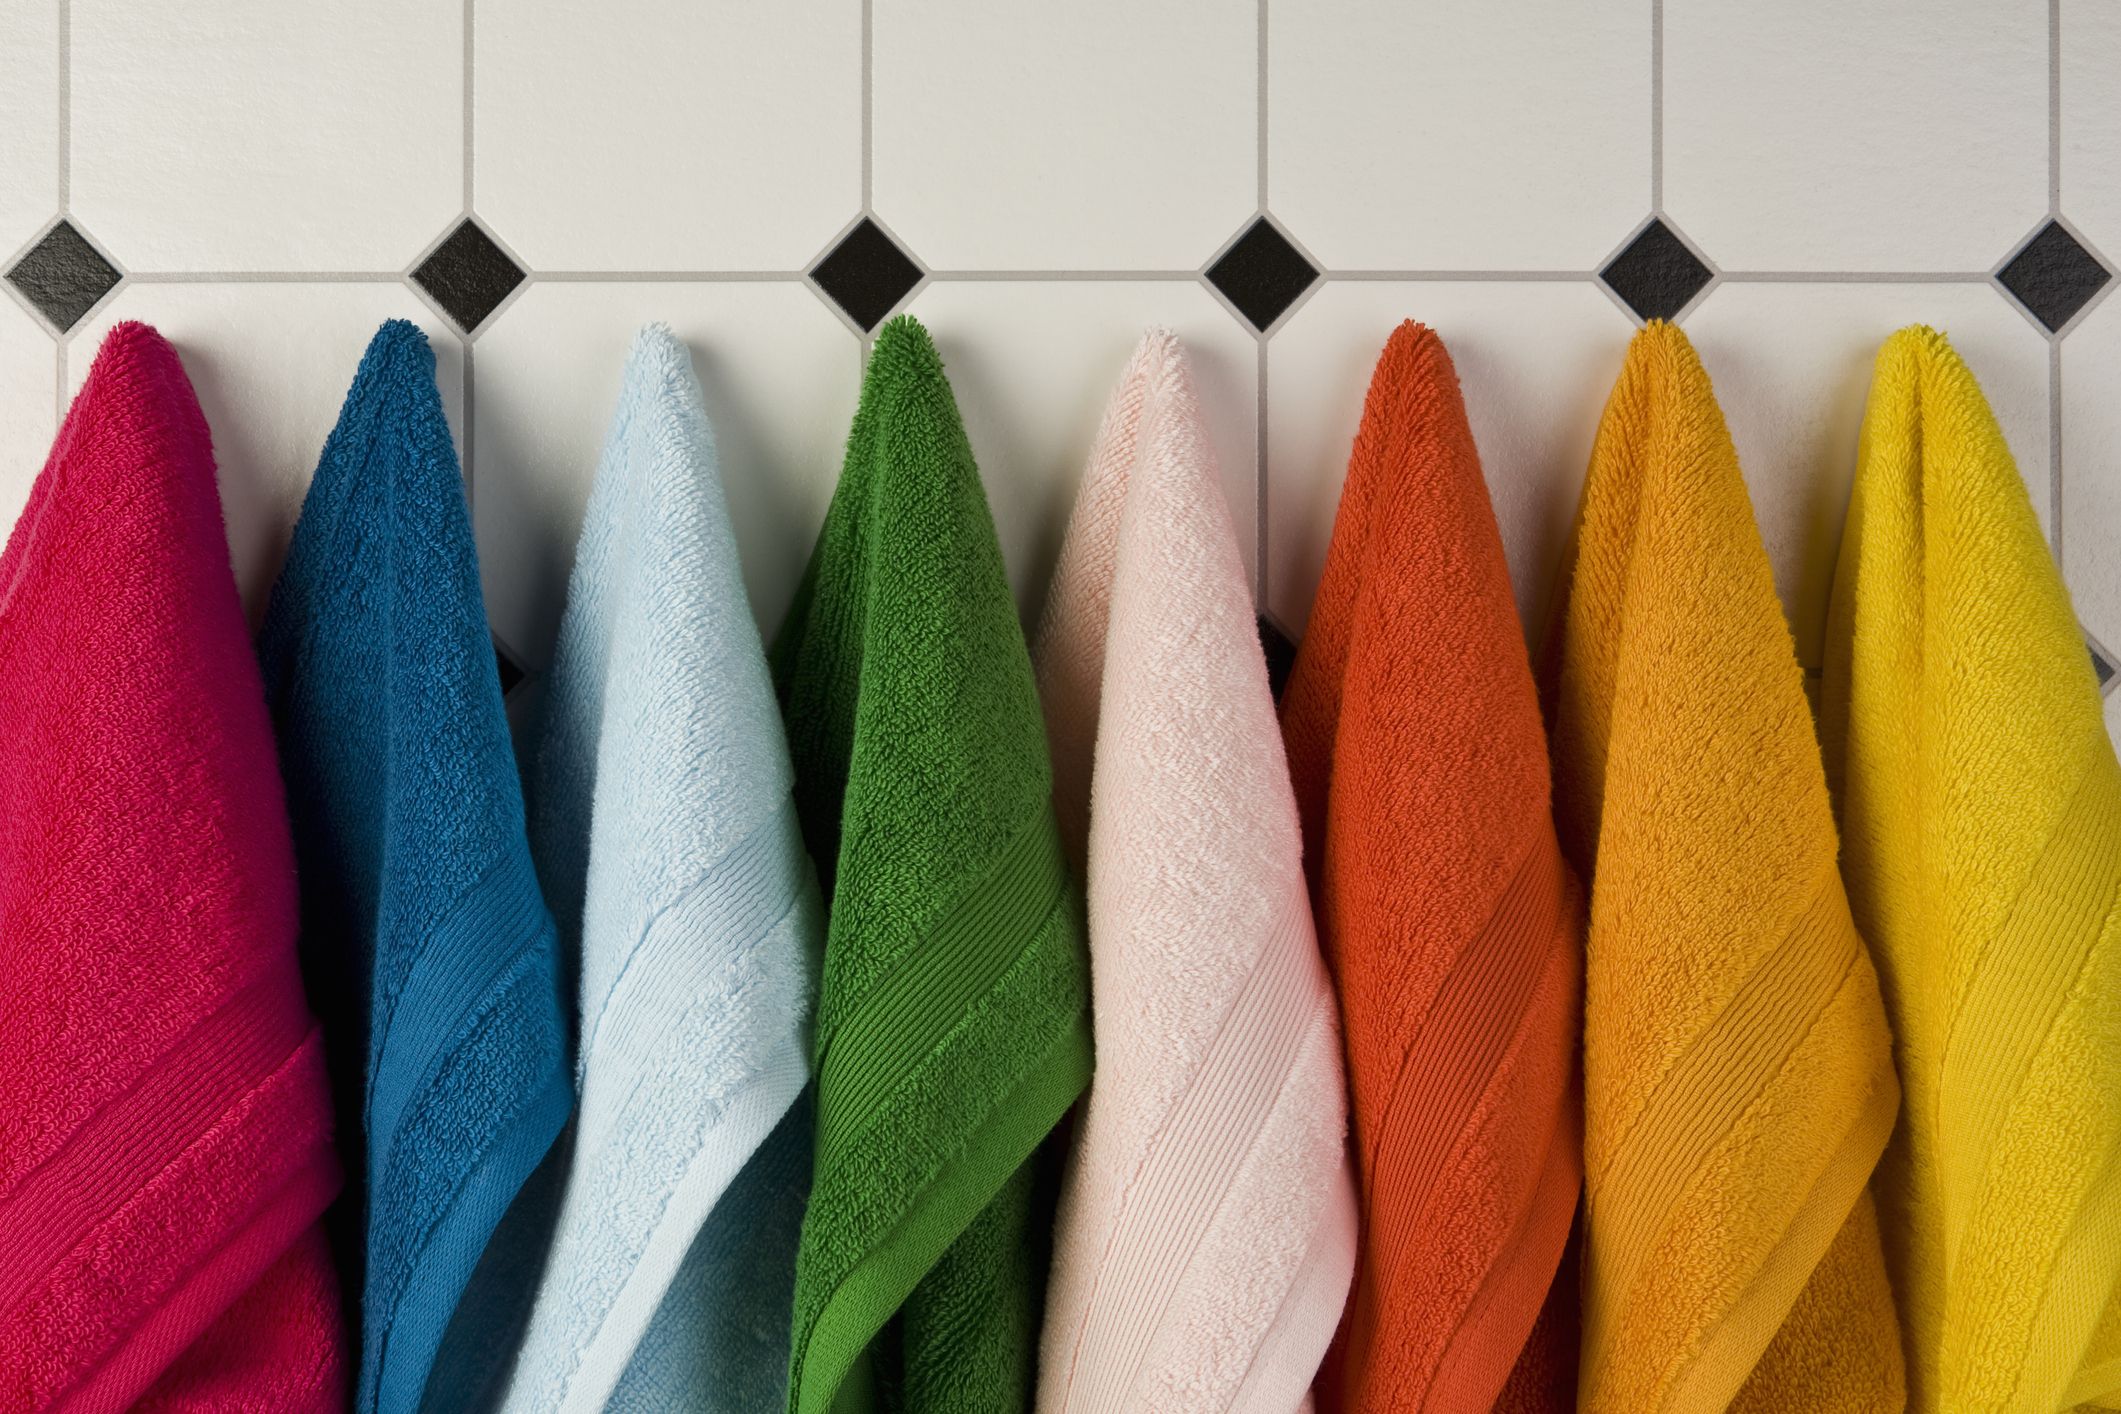 Change the Way that You Clean with Our Top 5 Kitchen Towel Types